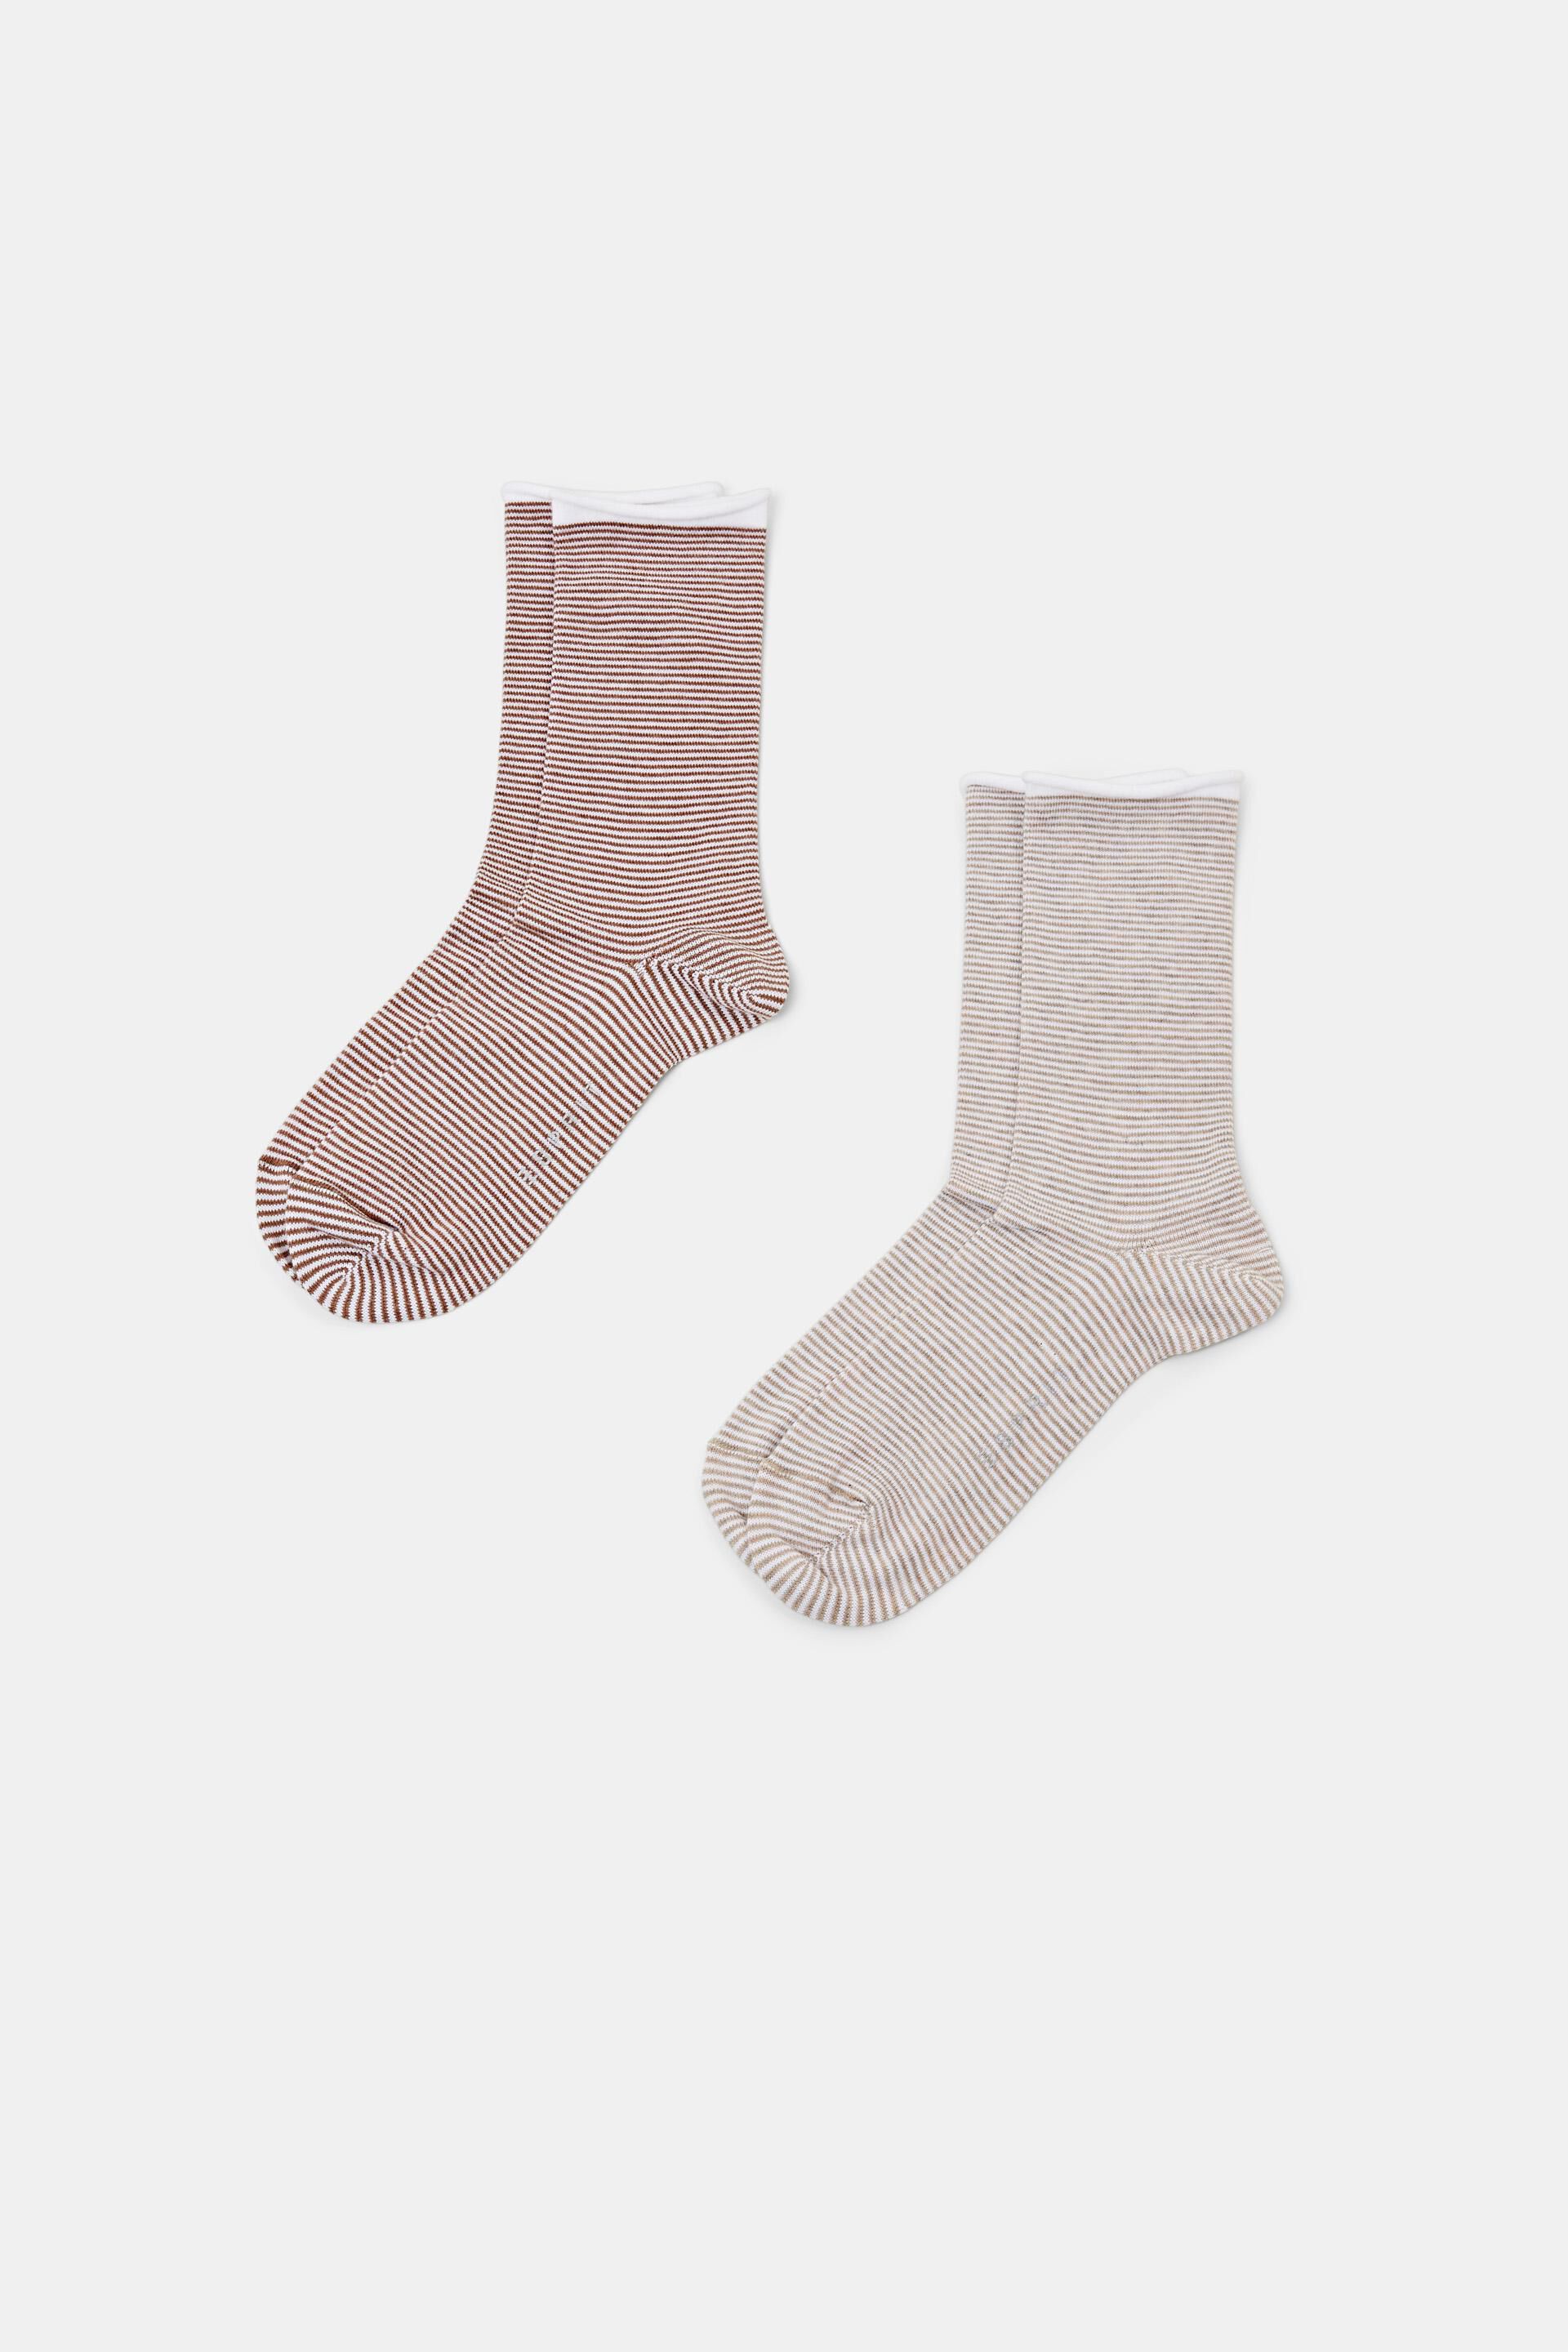 Esprit rolled socks cuffs, organic cotton Striped with